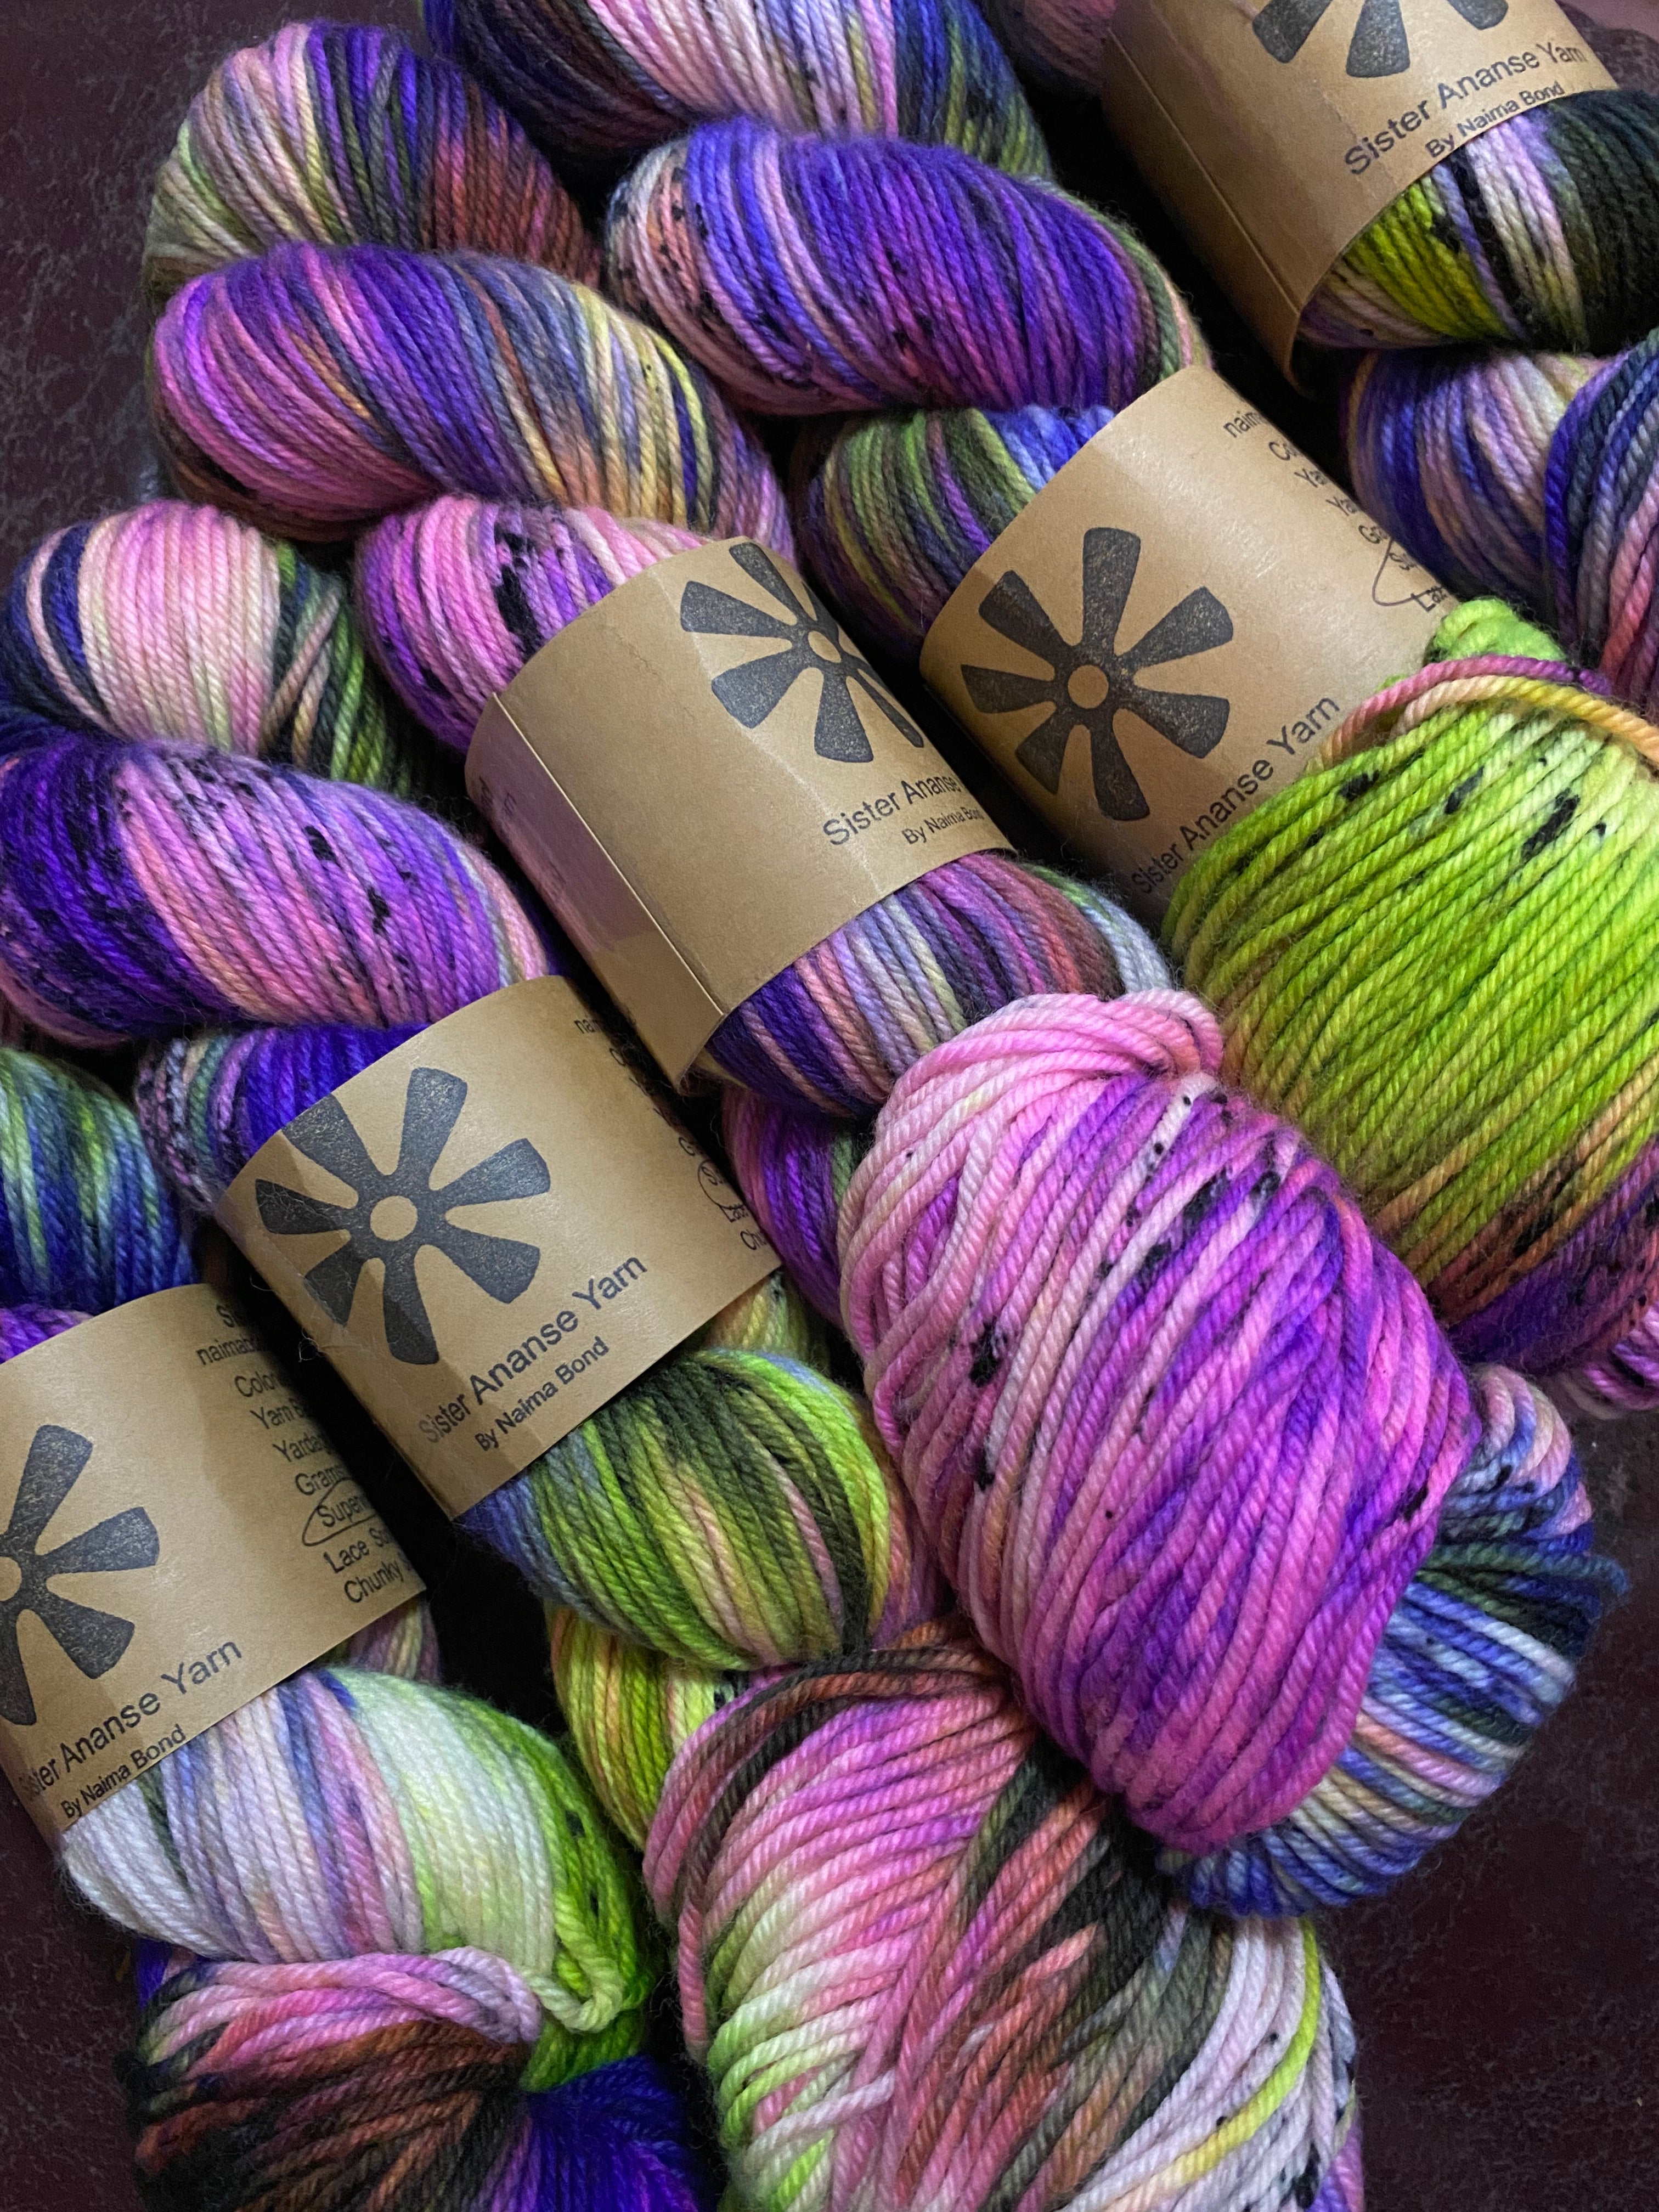 “Psychedelia” One of a Kind Hand Dyed Yarn